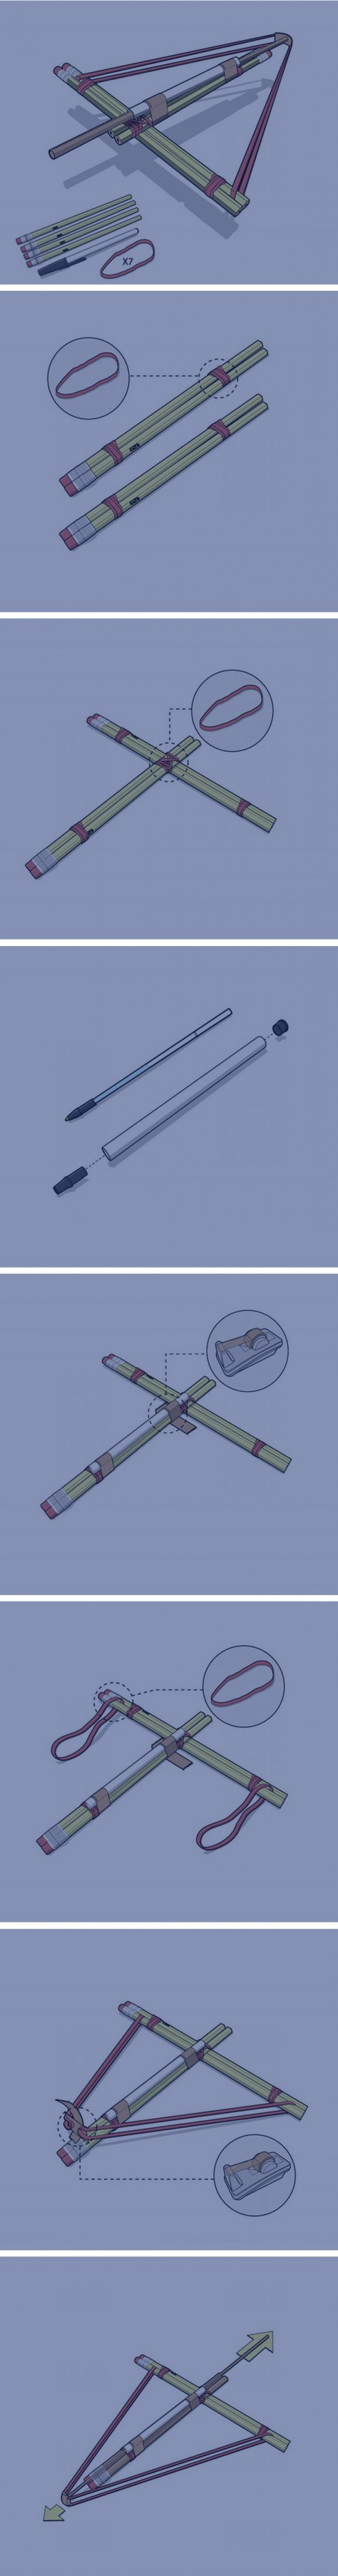 Easy DIY Crossbow From Pencils And Office Supply To Kill Time With